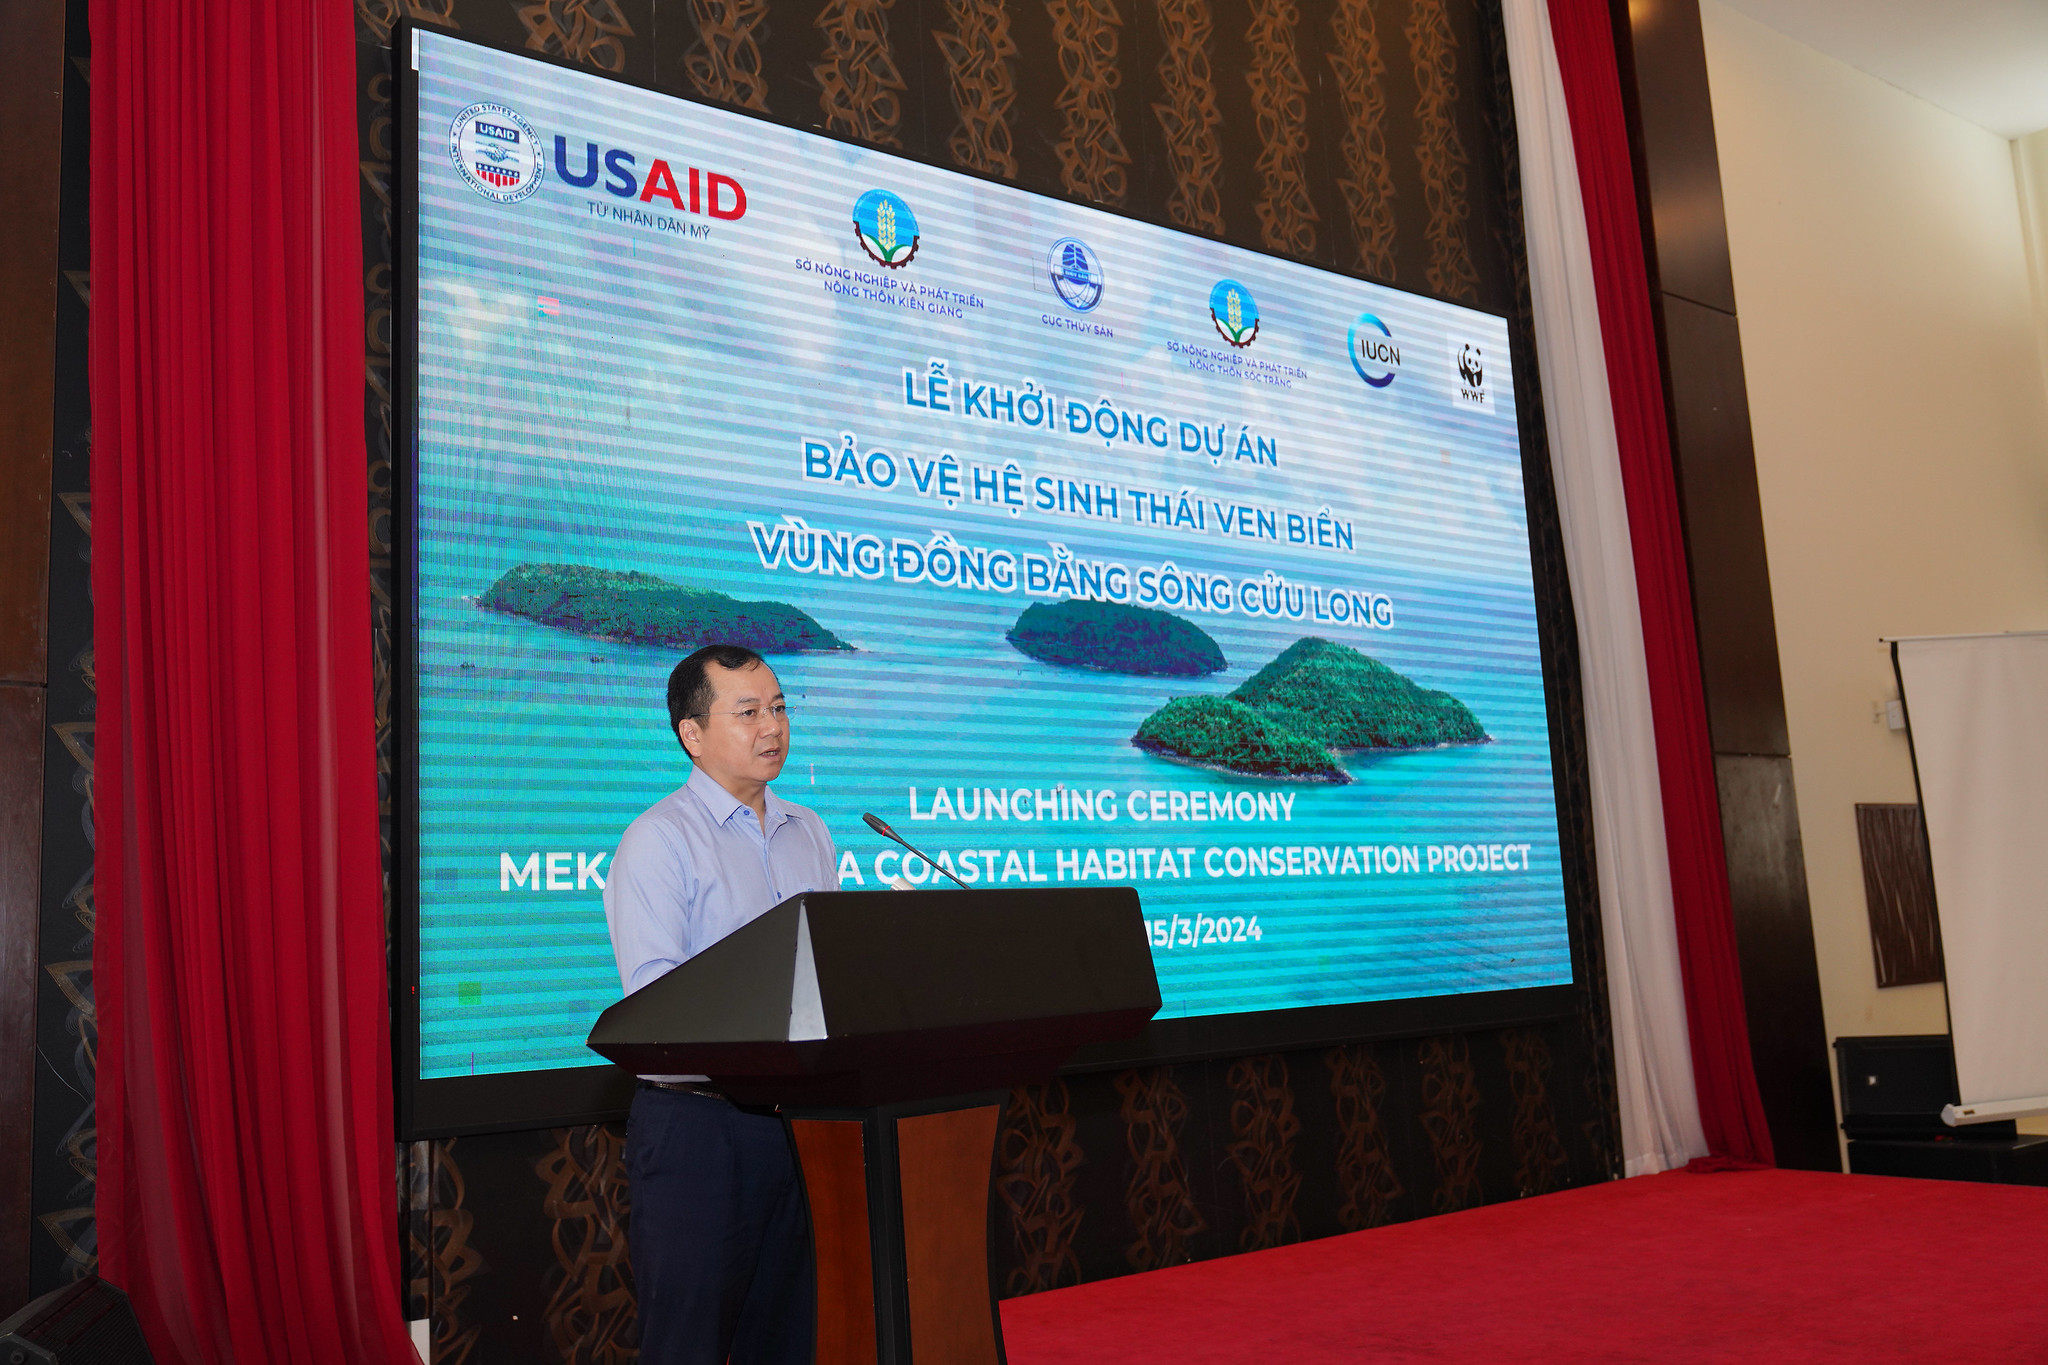 Tran Dinh Luan, director of the Directorate of Fisheries under the Vietnam Ministry of Agriculture and Rural Development, speaks at the launching ceremony of the USAID-funded Mekong Delta Coastal Habitat Conservation project, Kien Giang Province, southern Vietnam, March 15, 2024. Photo: USAID Vietnam